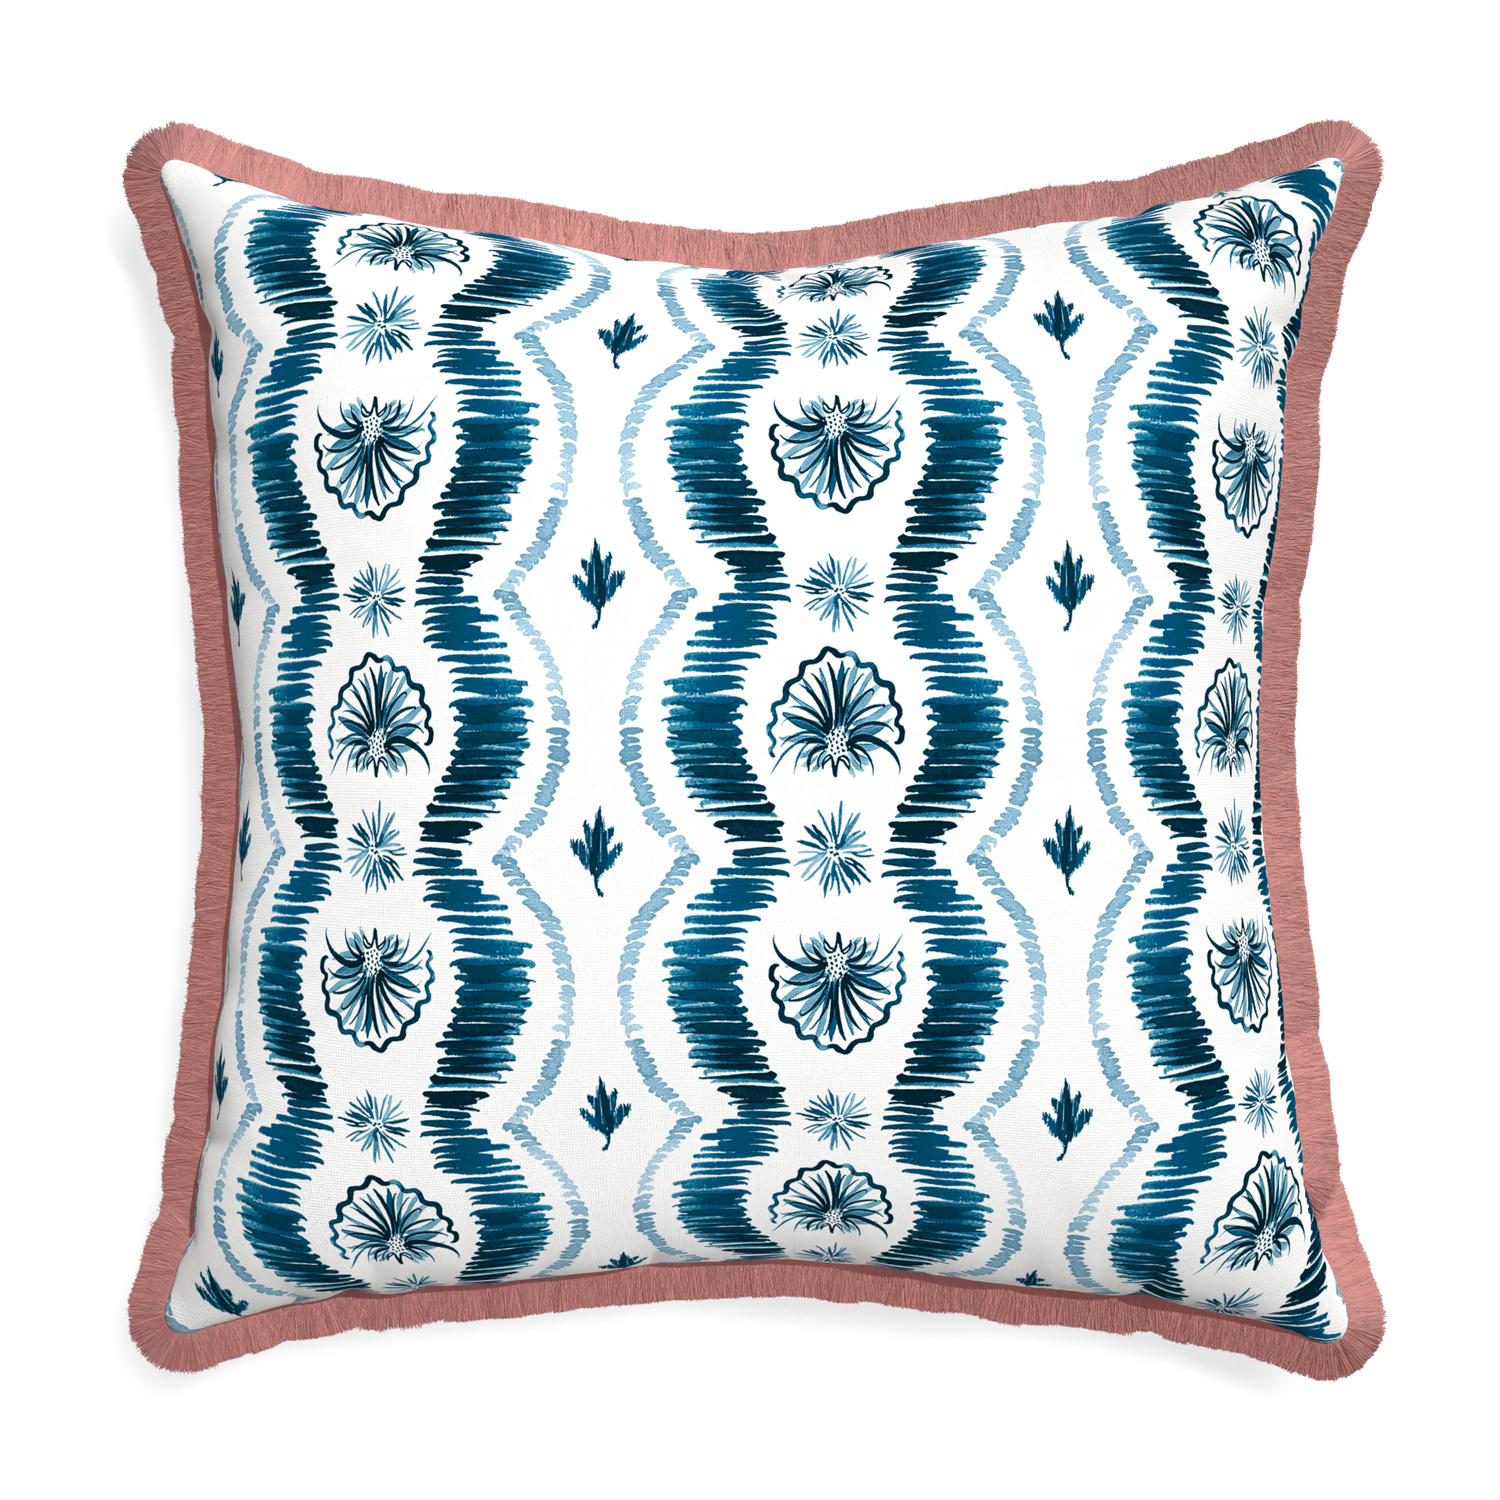 26 inch Square Blue Ikat Stripe Pillow with dusty rose fringe